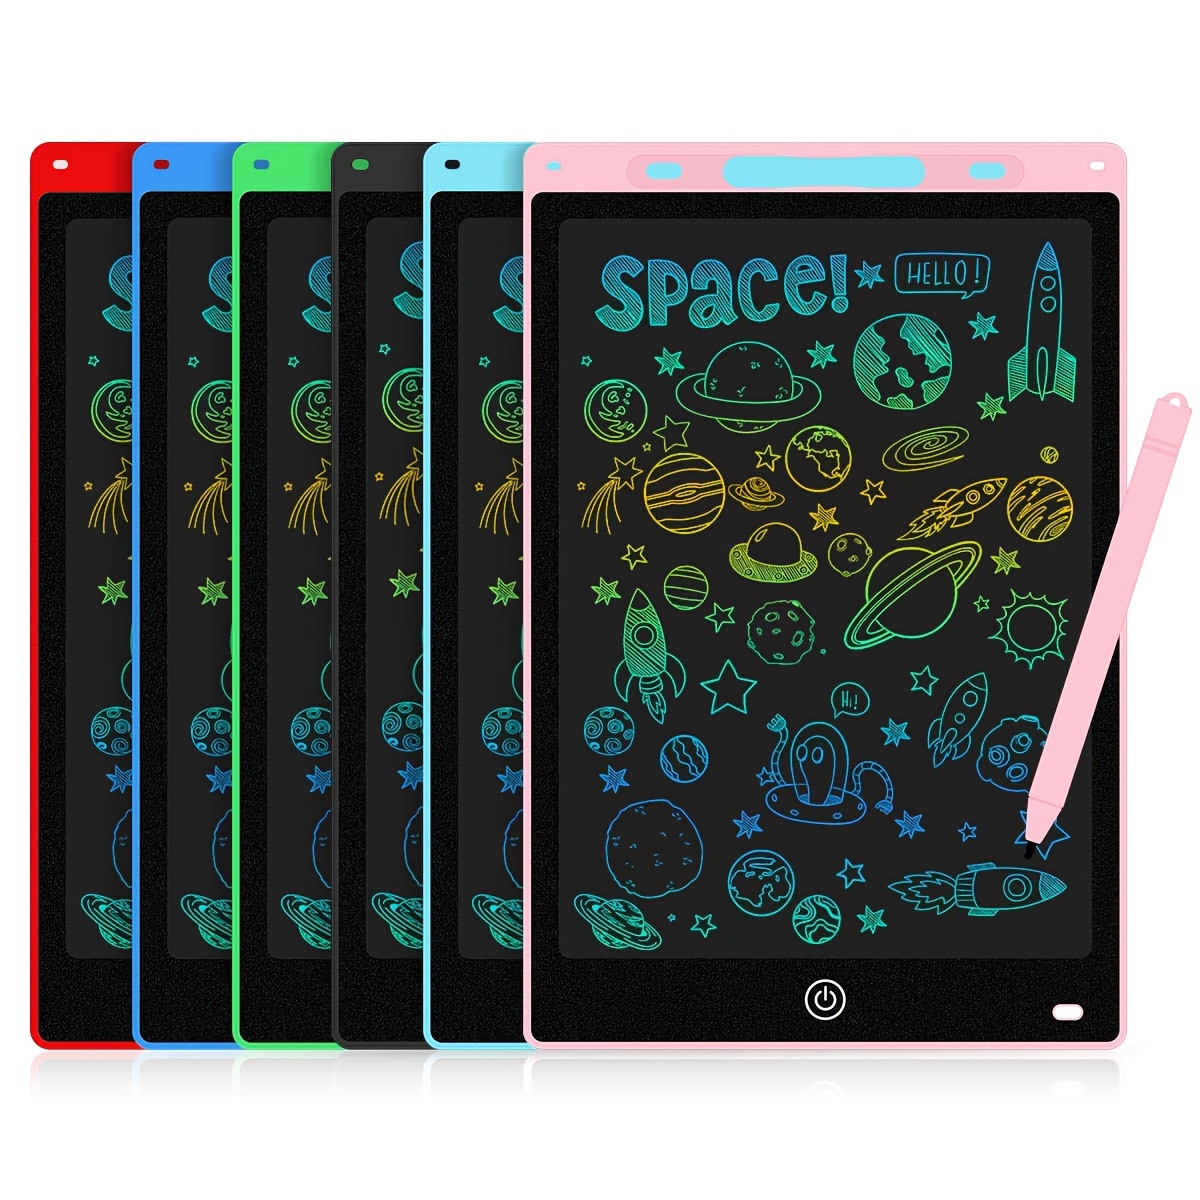 

12inch Lcd Writing Tablet Electronic Digital Writing Colorful Screen Doodle Board Handwriting Paper Drawing Tablet Gift For Adults At Home School And Office Easter Gift